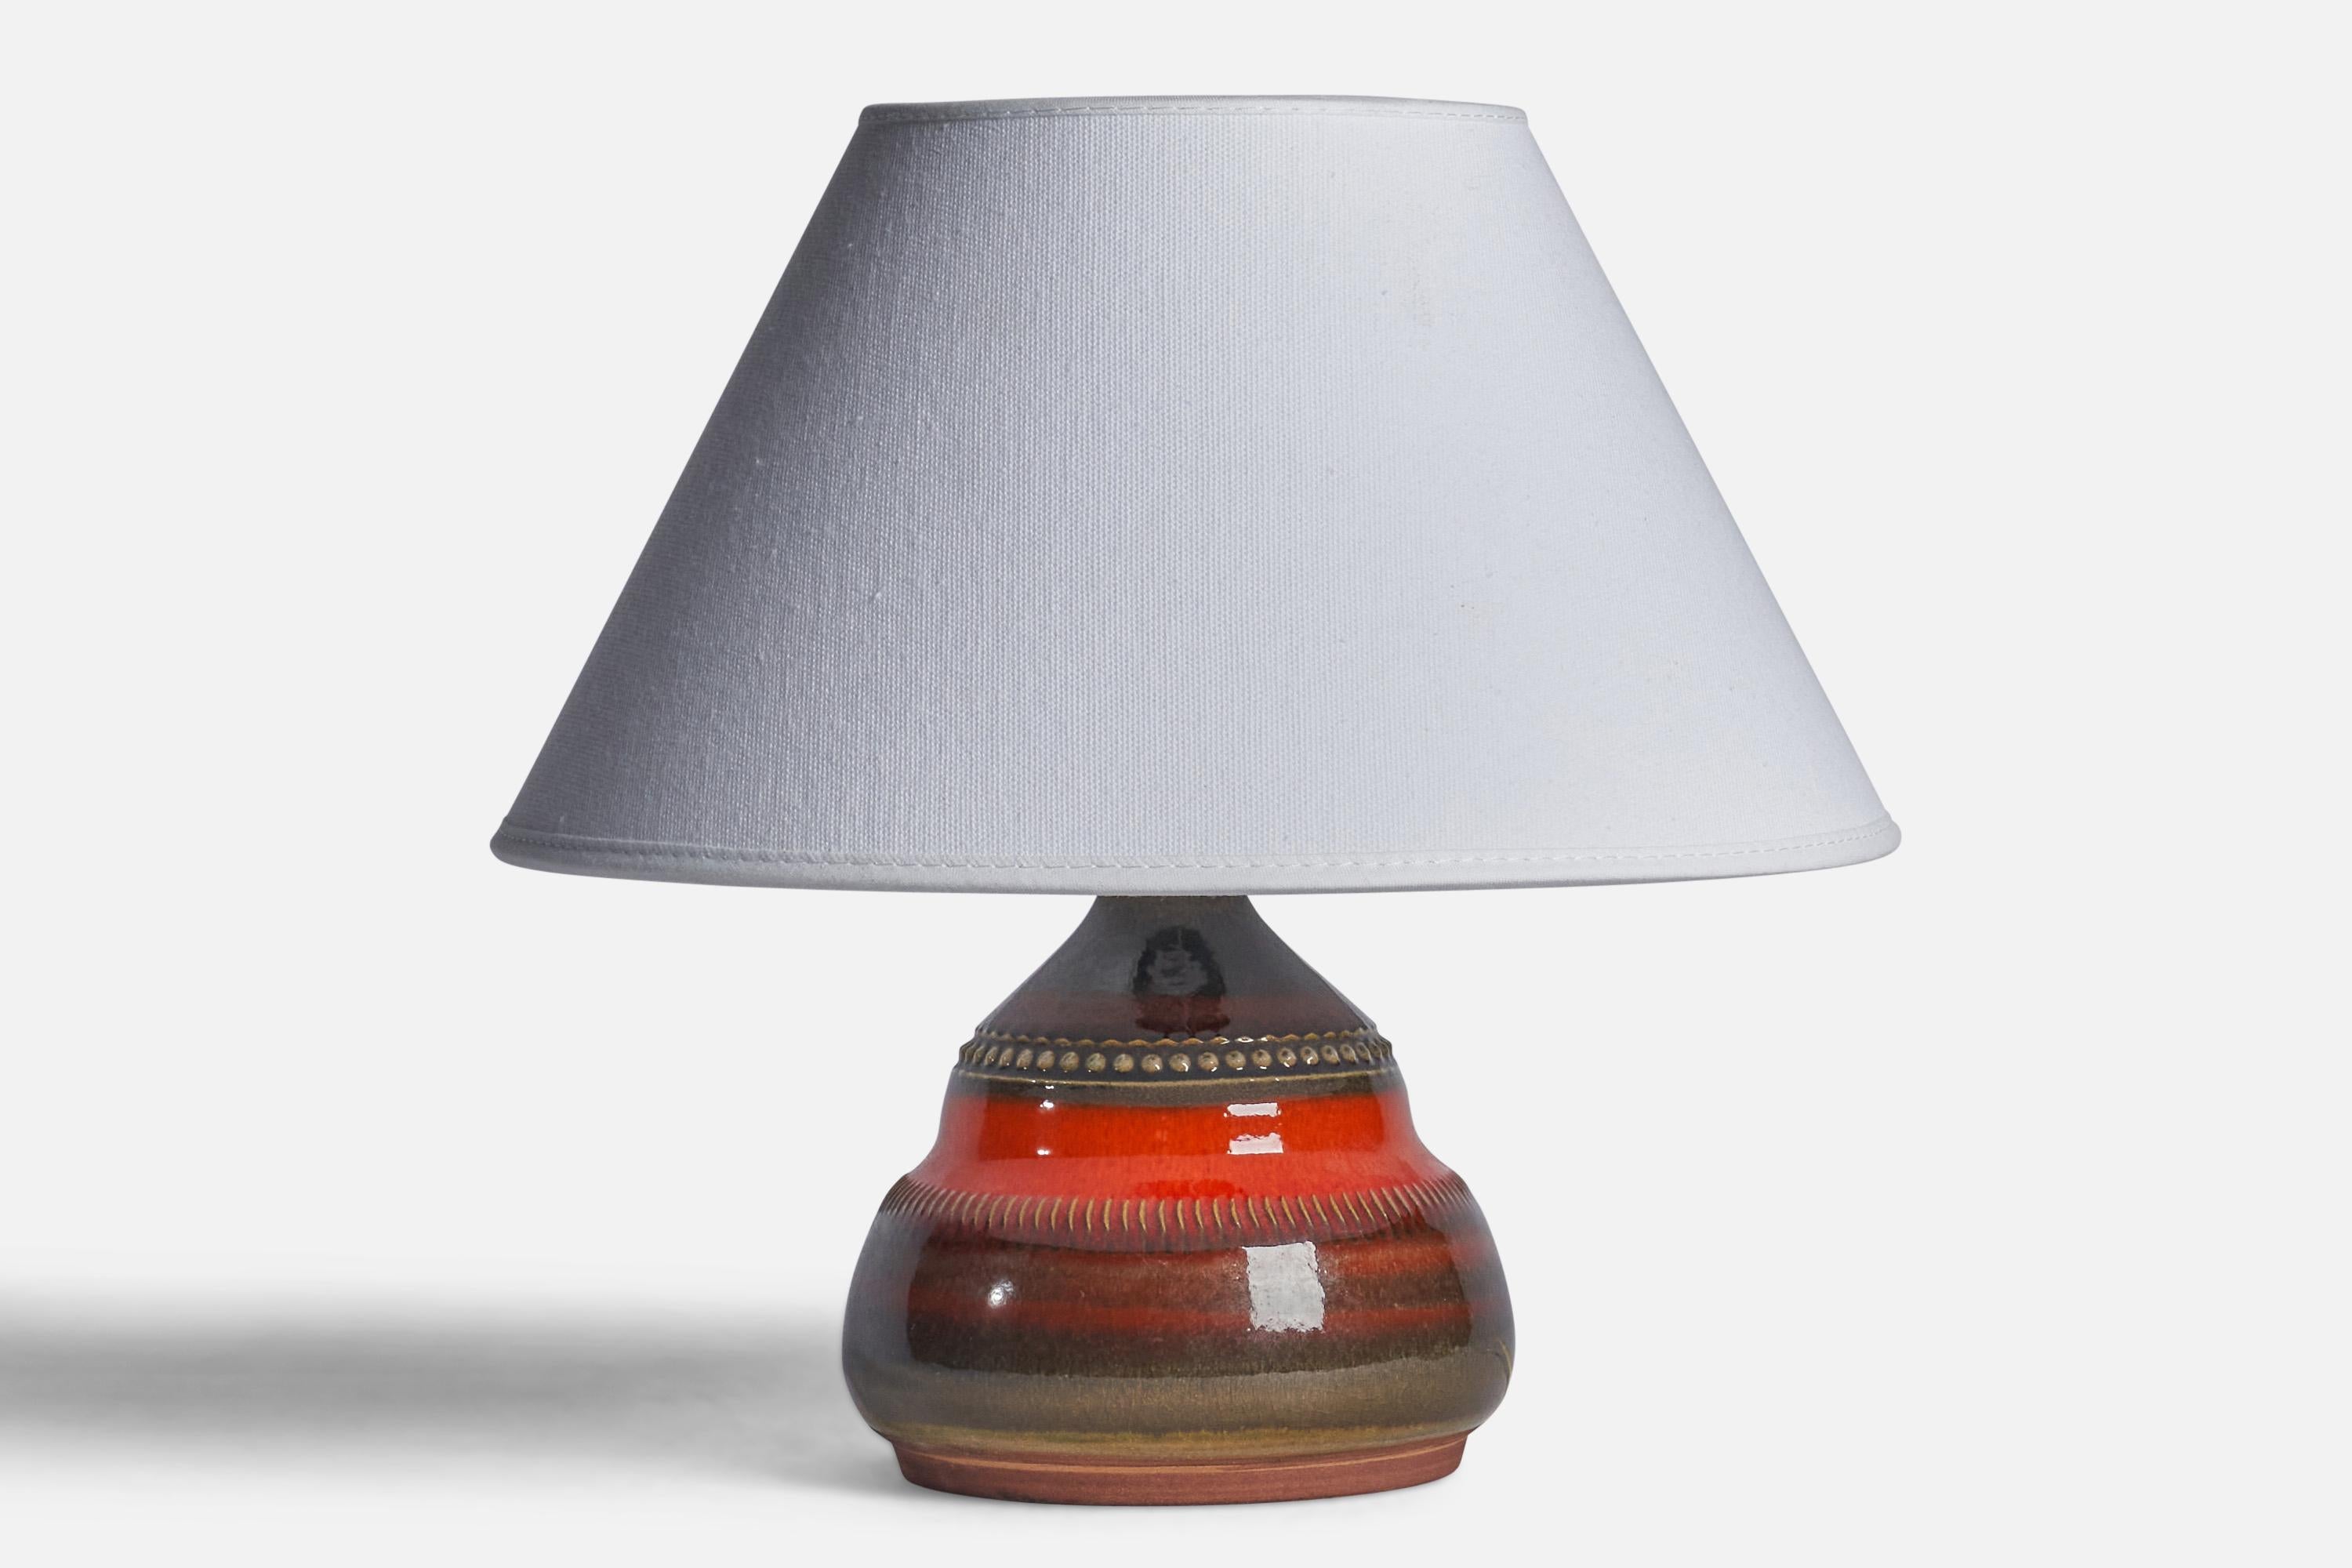 A green and red-glazed and incised stoneware table lamp designed and produced by Klase Höganäs, Sweden, 1960s.

Dimensions of Lamp (inches): 6.5” H x 5” Diameter
Dimensions of Shade (inches): 7” Top Diameter x 10” Bottom Diameter x